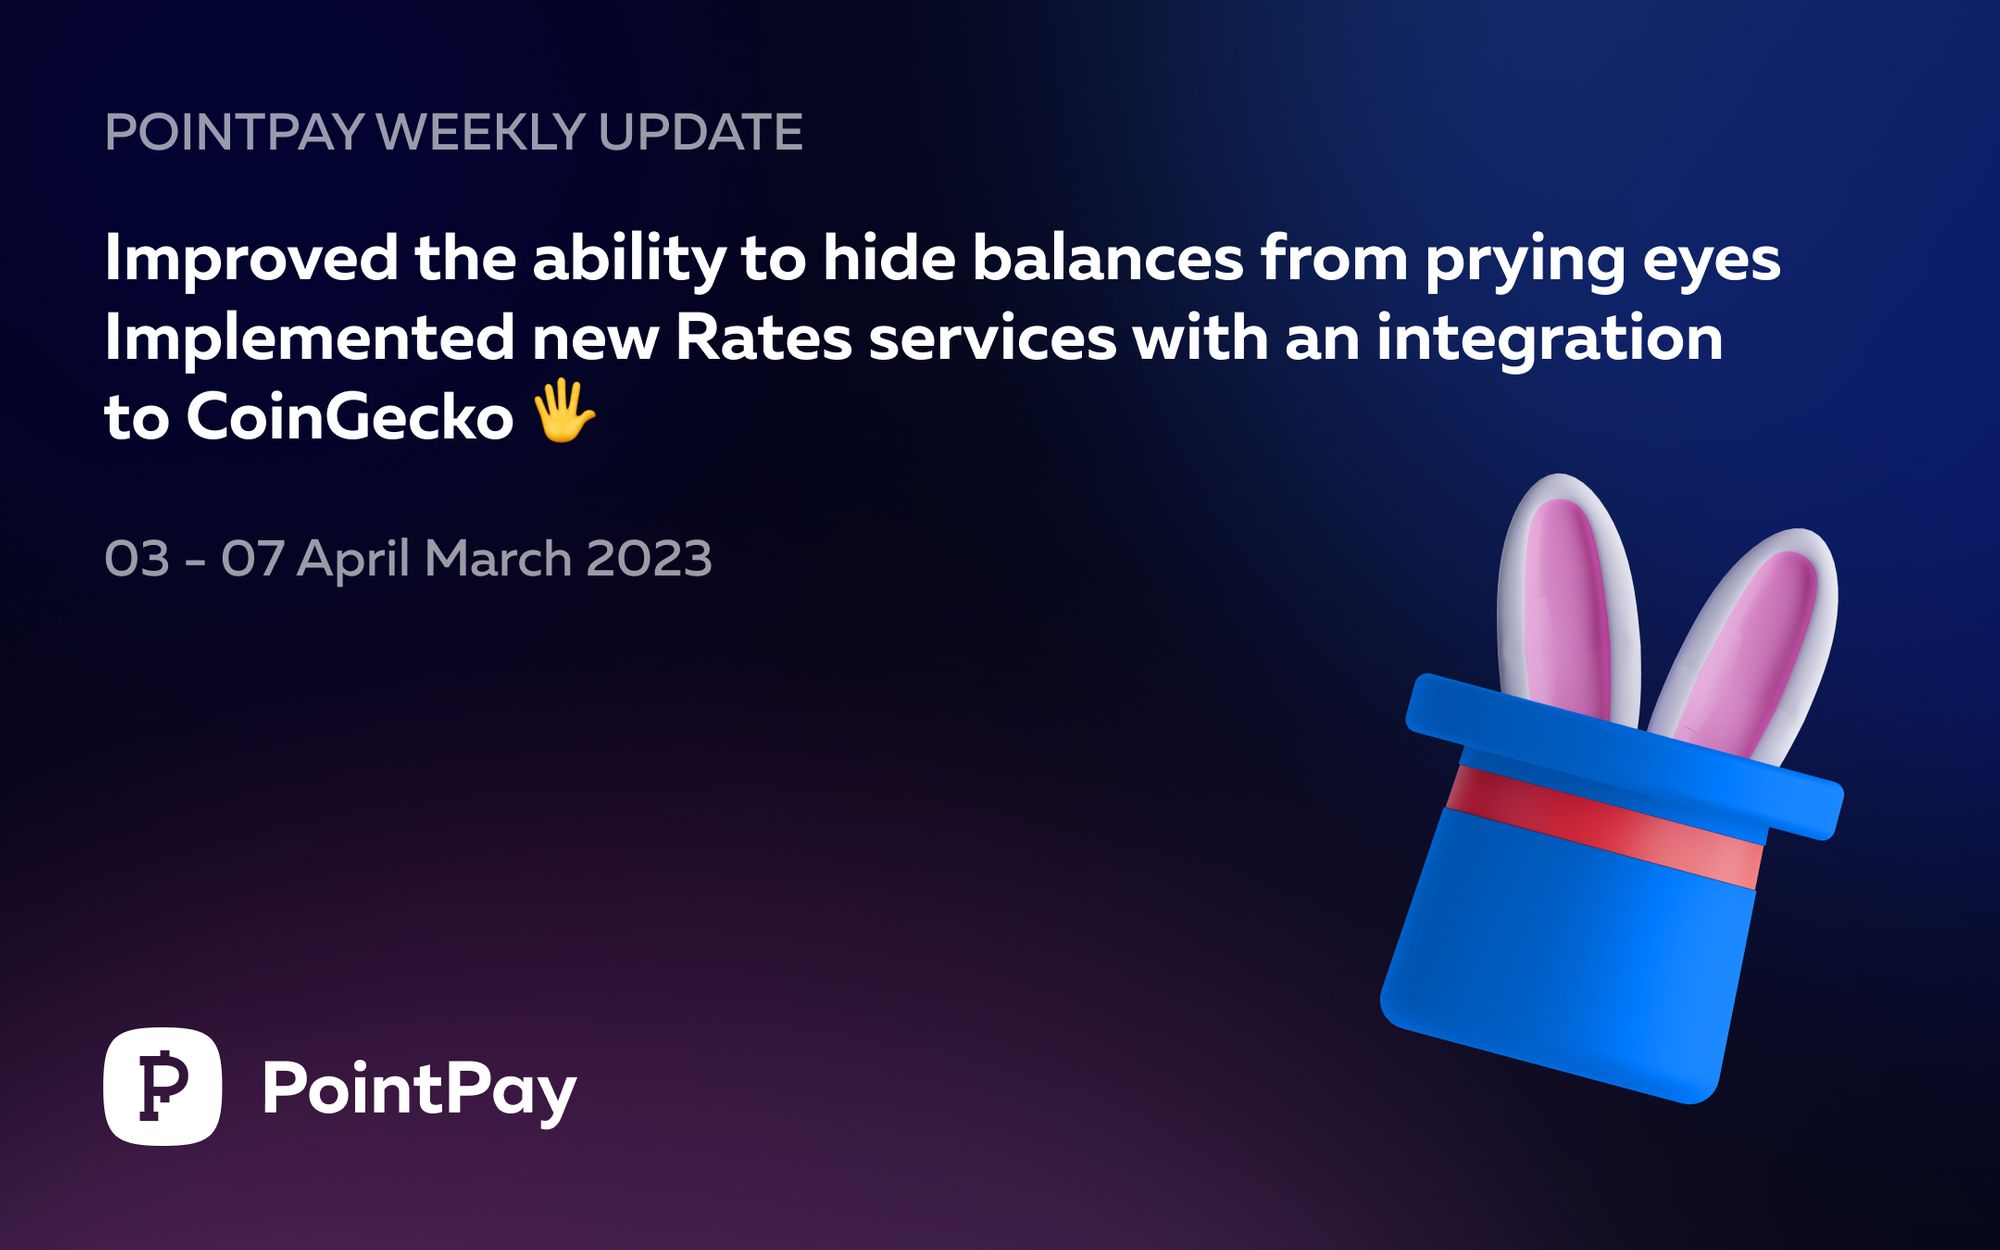 PointPay Weekly Update (3 - 7 April 2023)